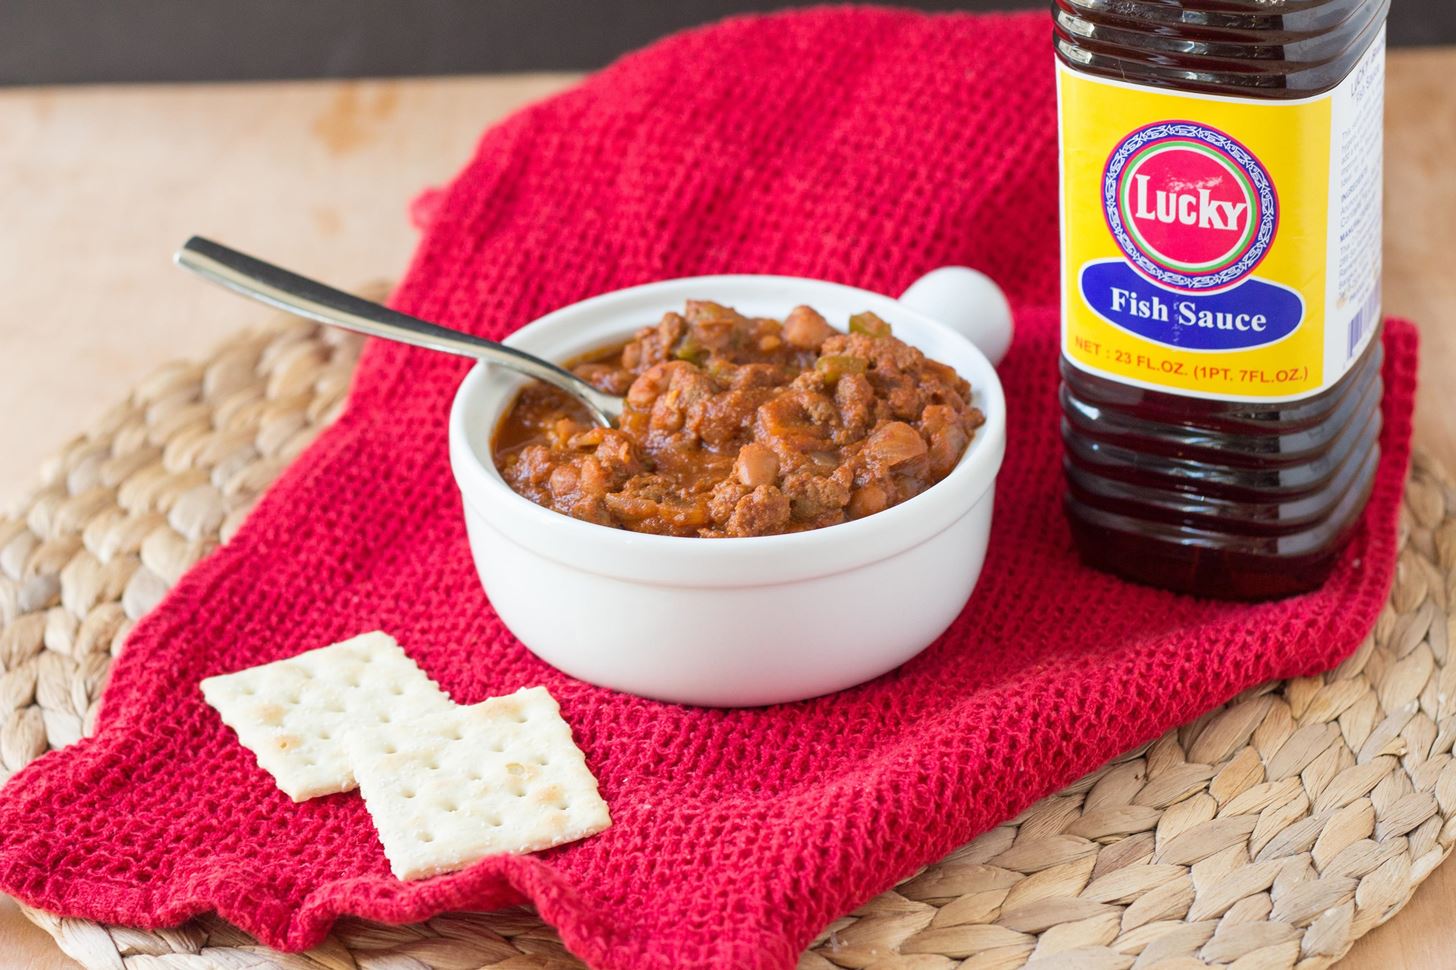 These Are the Two Best (But Bizarre) Secret Chili Add-Ins to Spice Up Your Life